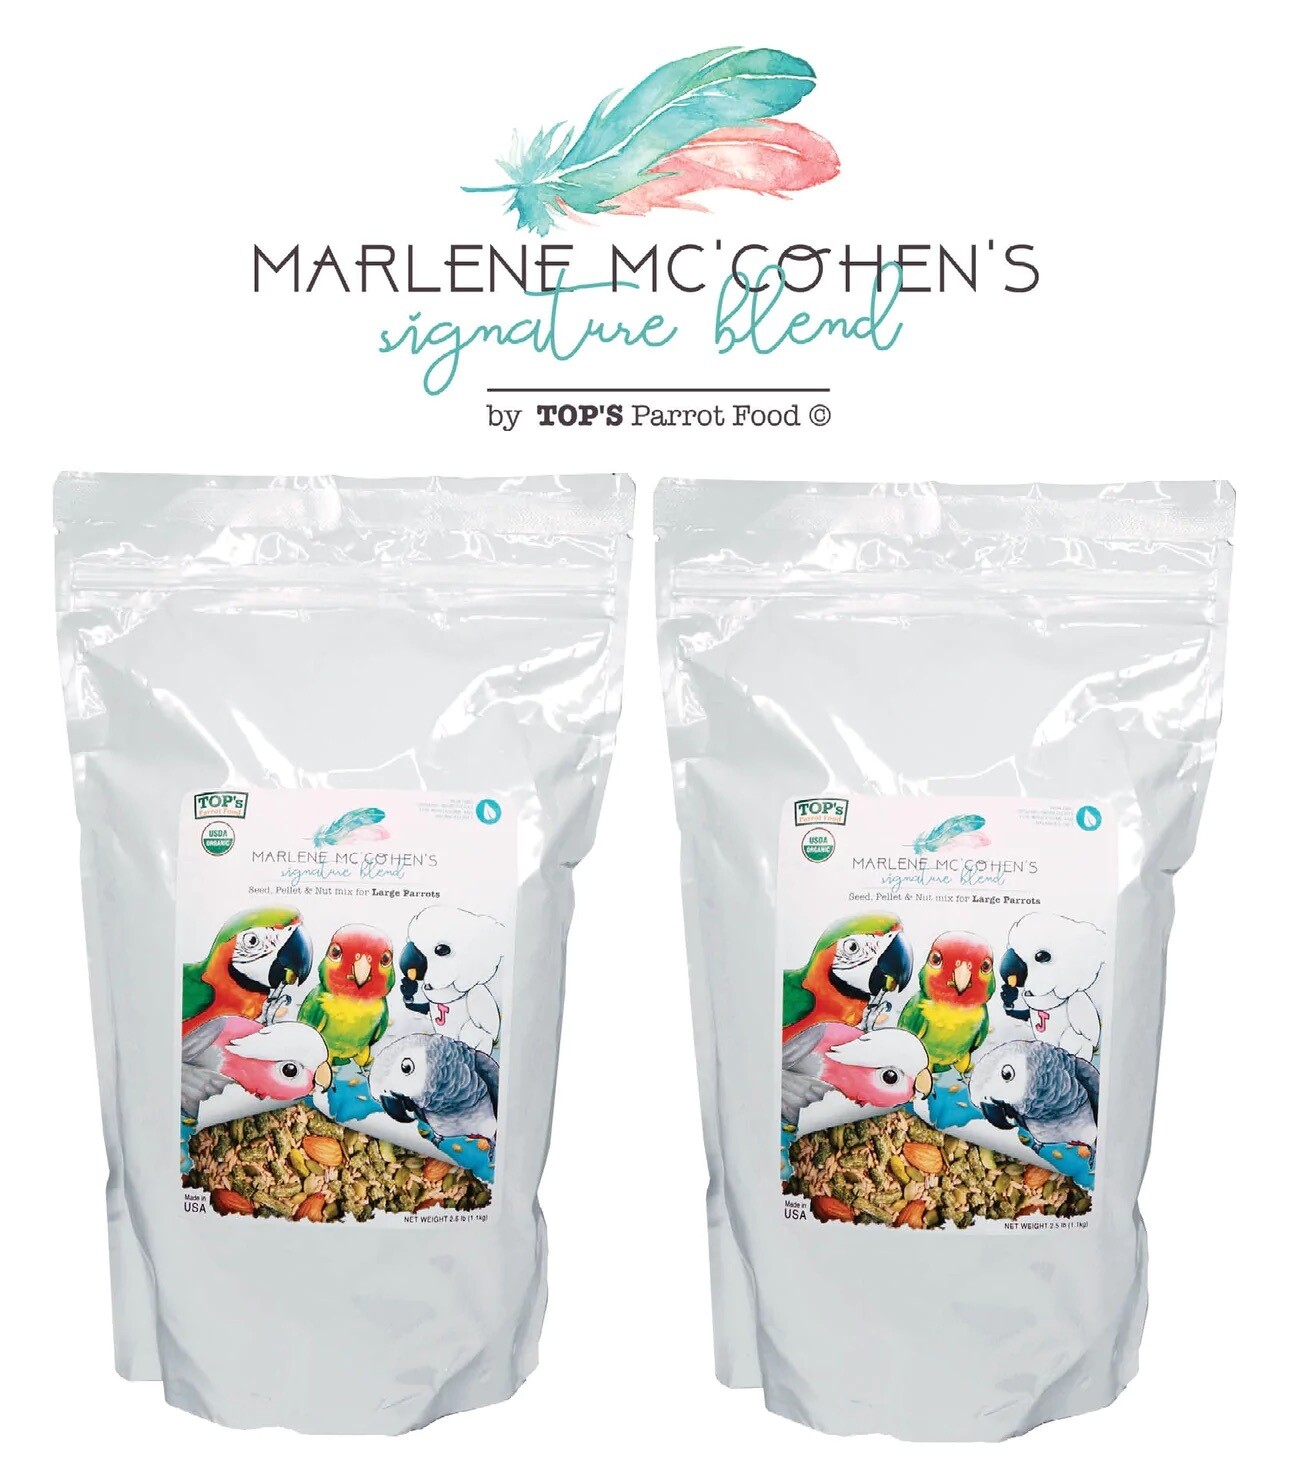 Marlene Mc'Cohen's Signature Blend by TOPs Parrot Food - Mix of TOPs pellets, seed mixes and nuts for Large Birds 2.5Lb